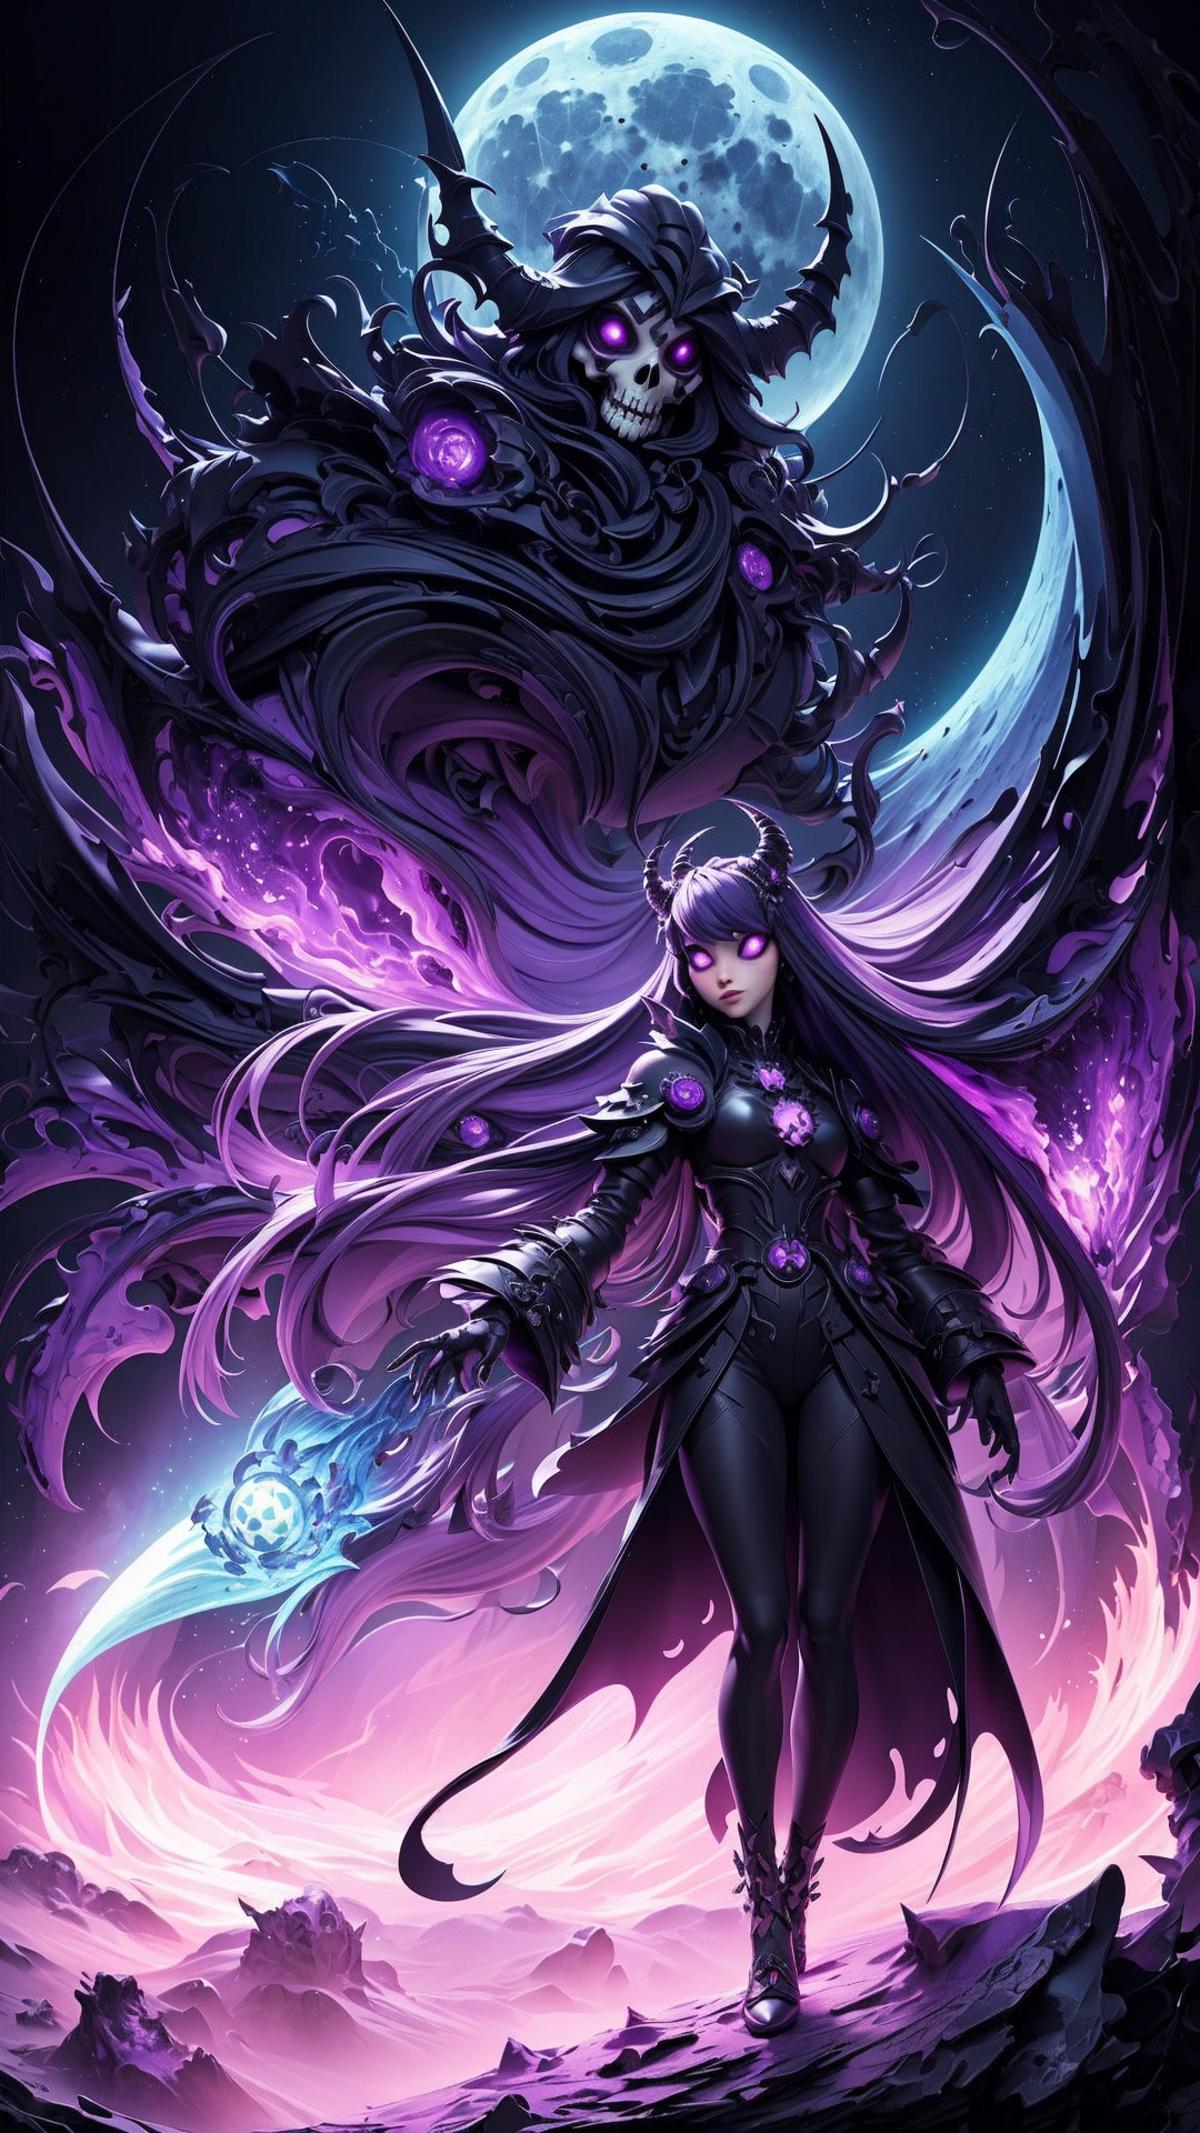 A woman in purple with long hair, holding a sword and standing in front of a moon.